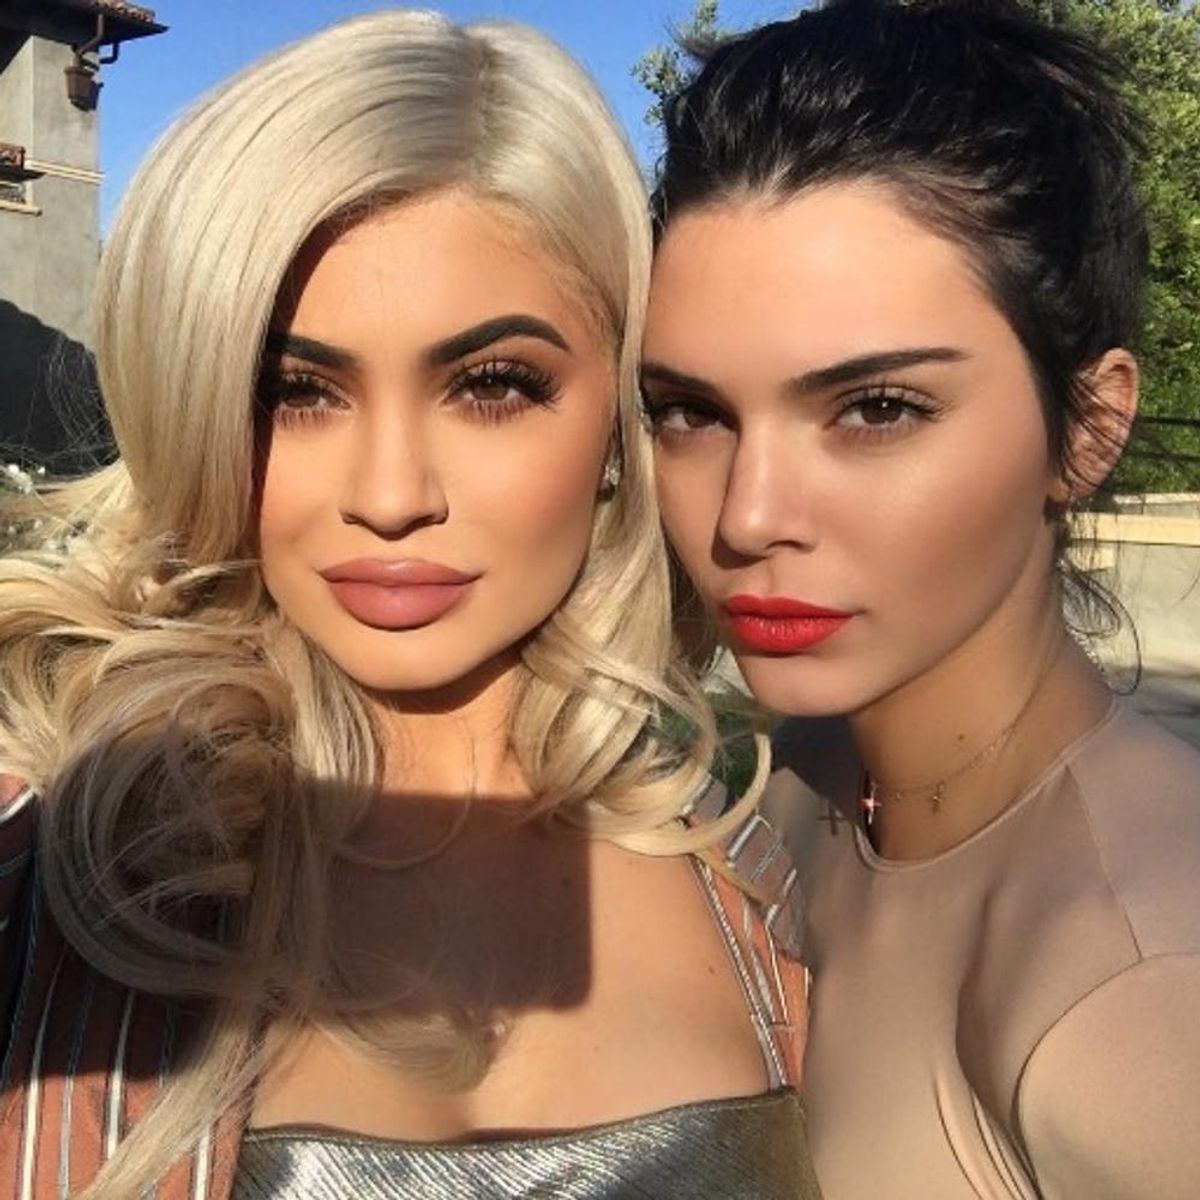 More Drama Around Blac Chyna’s Baby Shower As Kylie and Kendall Go Up Against Amber Rose